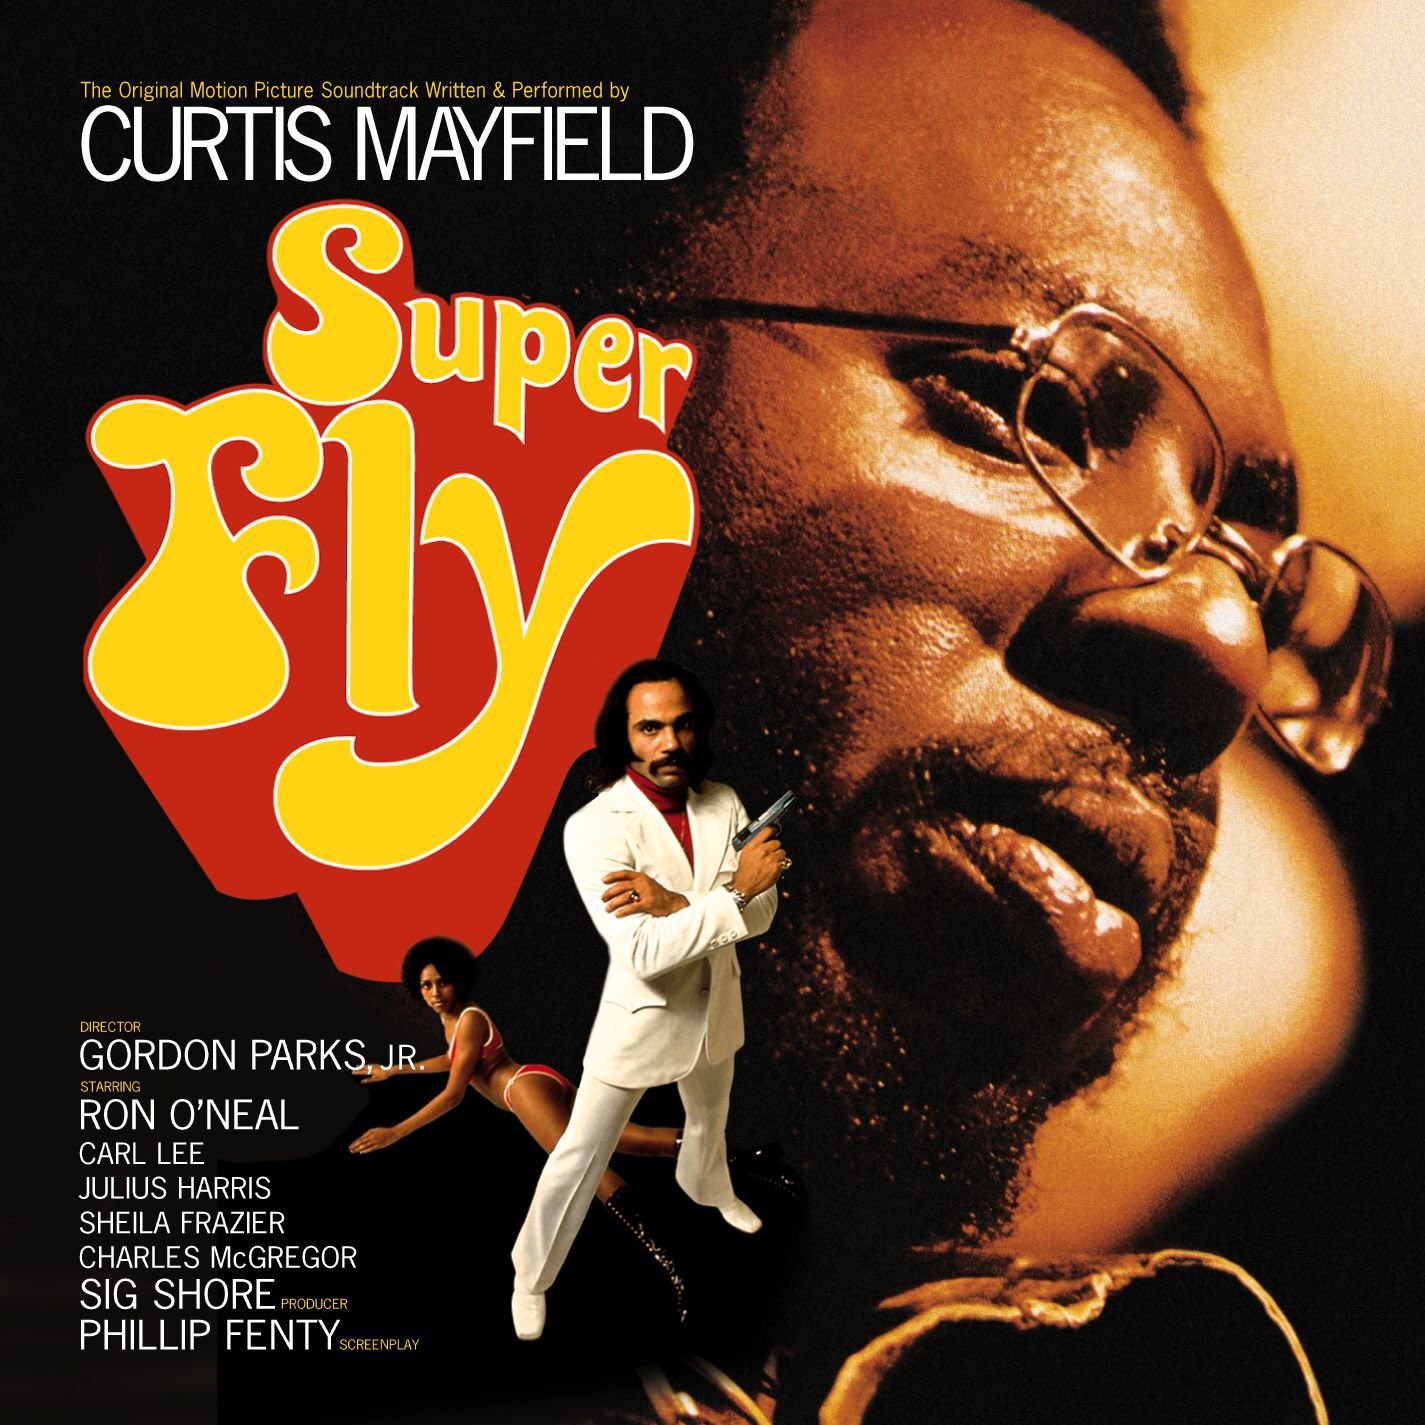 Happy Birthday Curtis Mayfield
Thank You For This Gem              